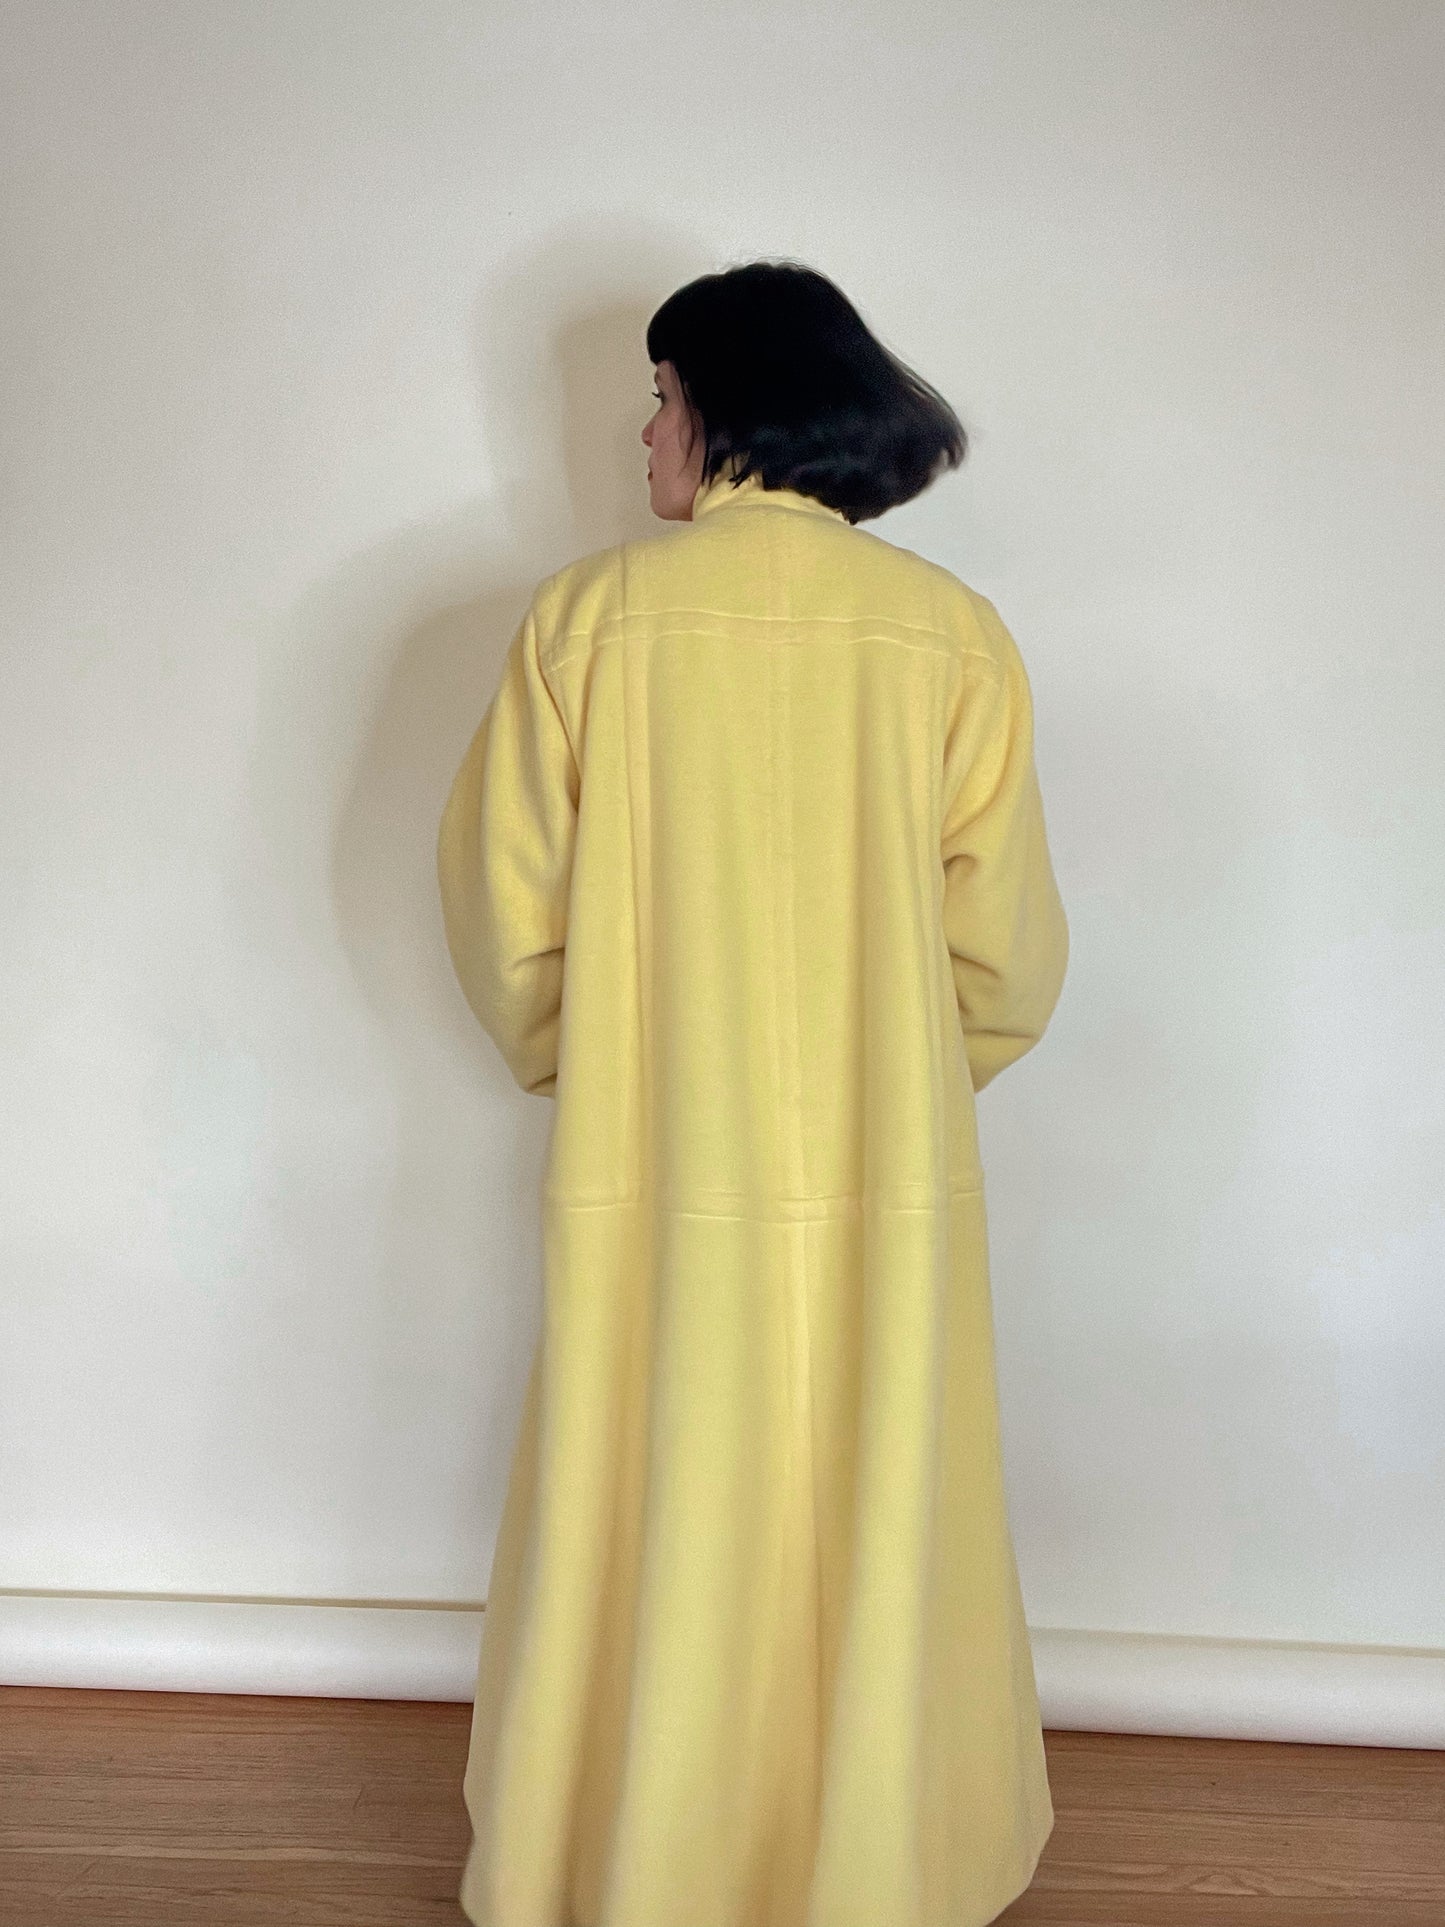 Vintage 80s 90s "Escada by Margaretha Ley" Made in Germany Yellow Wool Coat One Size Fits Most